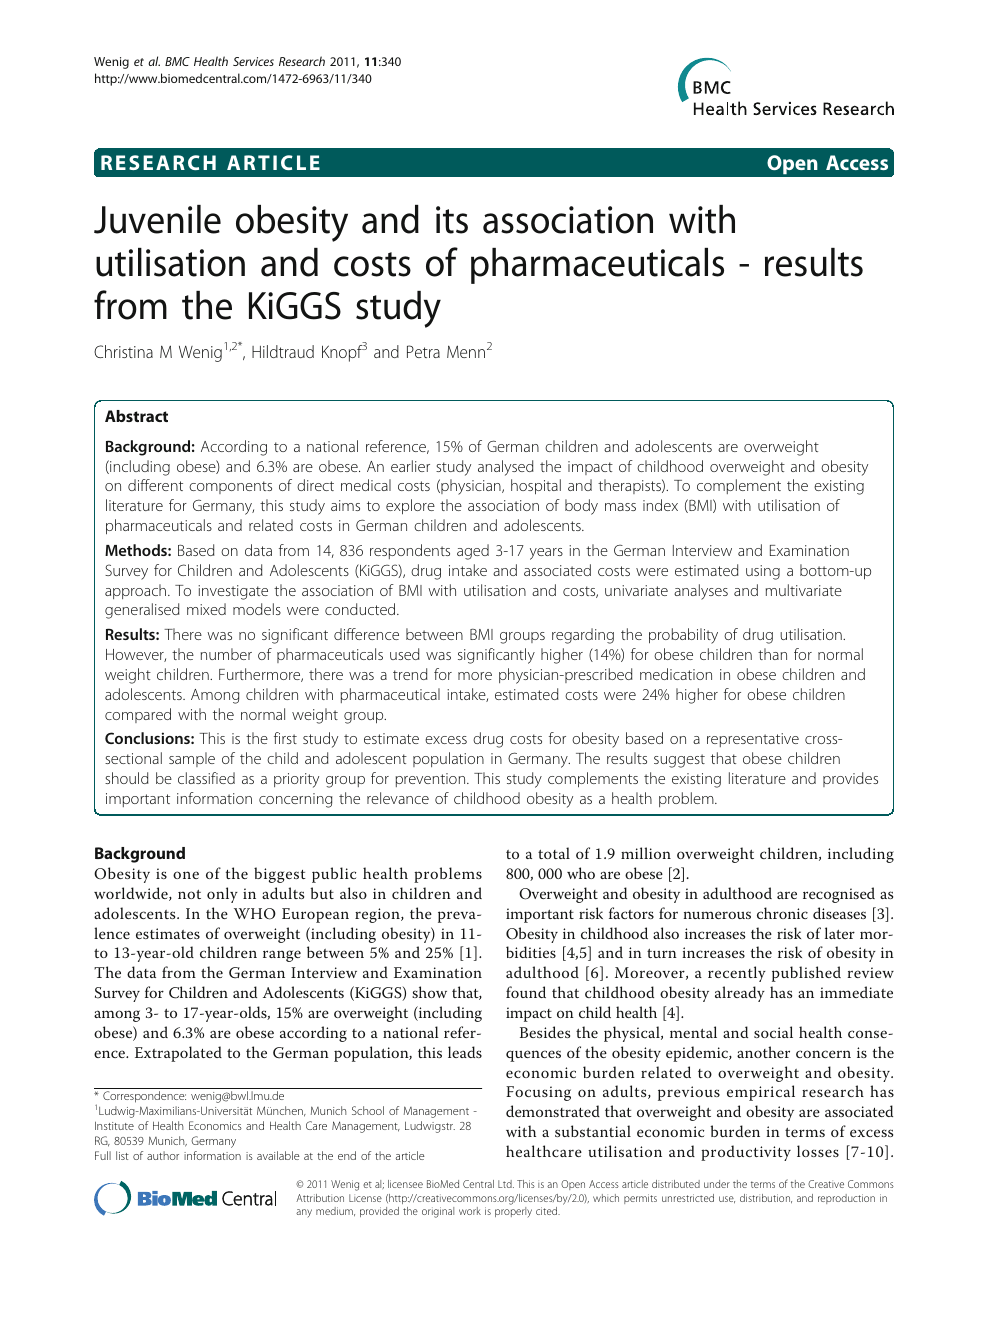 Juvenile Obesity And Its Association With Utilisation And Costs Of Pharmaceuticals Results From The Kiggs Study Topic Of Research Paper In Health Sciences Download Scholarly Article Pdf And Read For